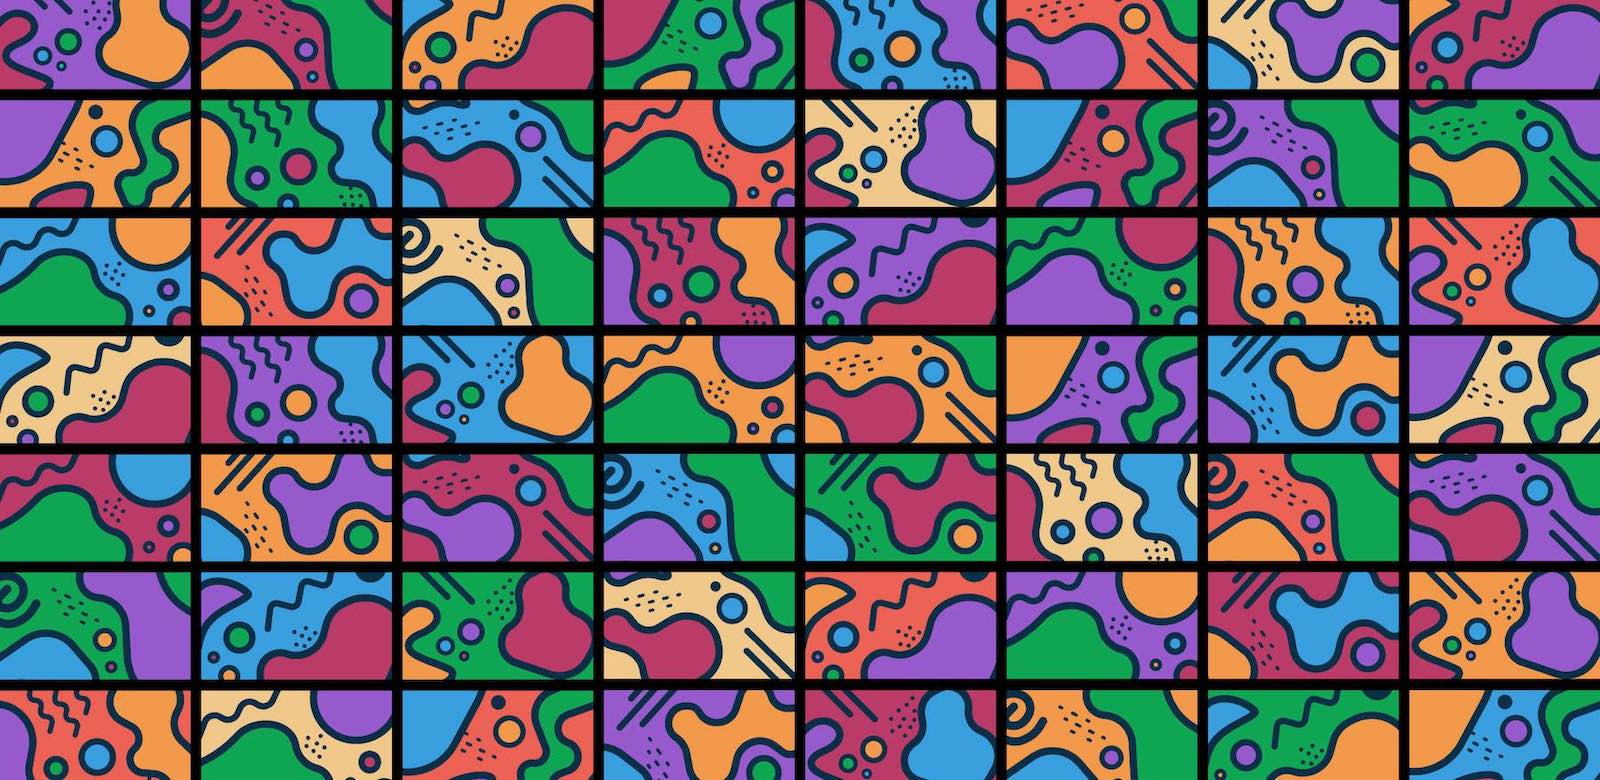 Illustration of colorful funky shapes